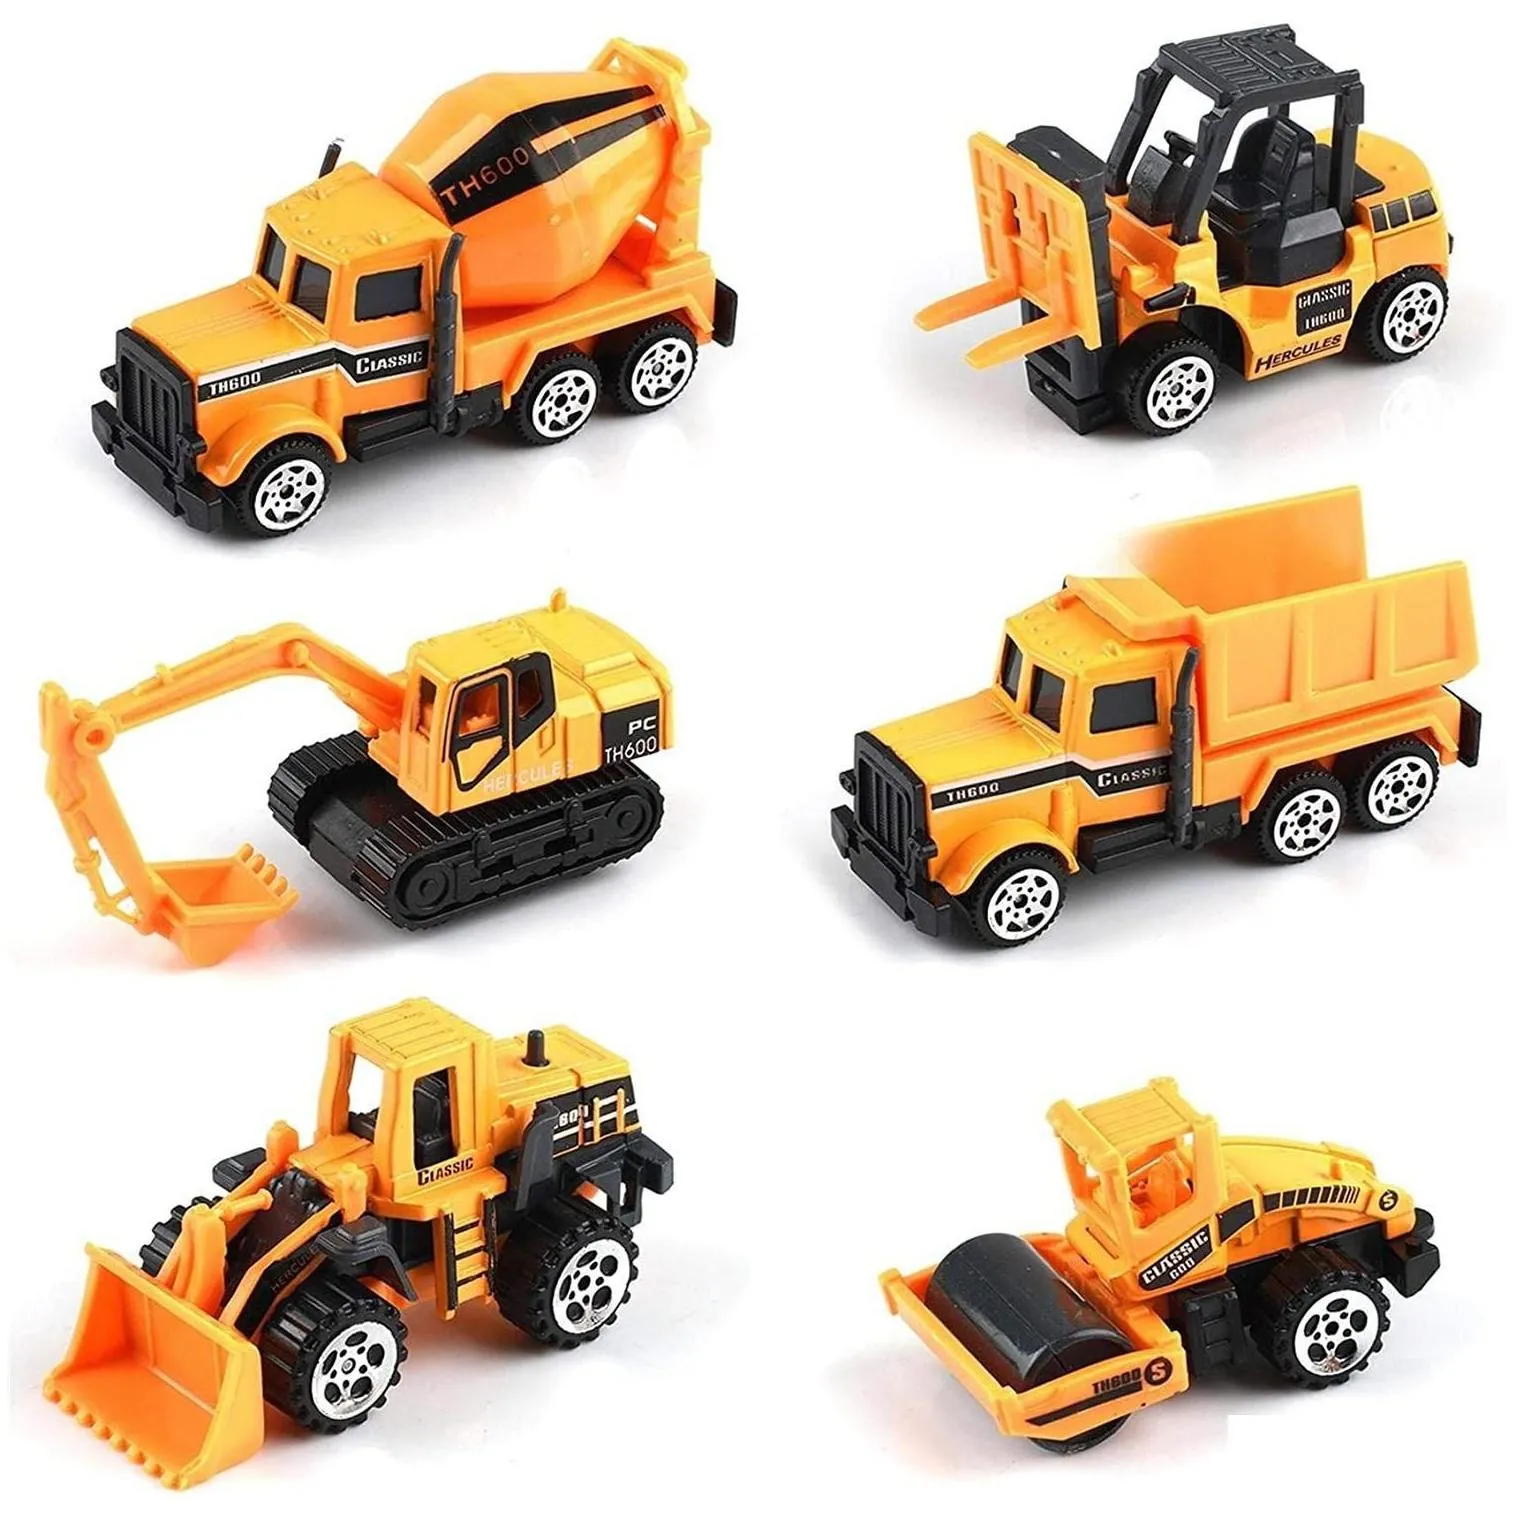 diecast model cars diecast model cars 6piece small construction toys vehicles play trucks vehicle toy toddlers boys kid mini alloy c